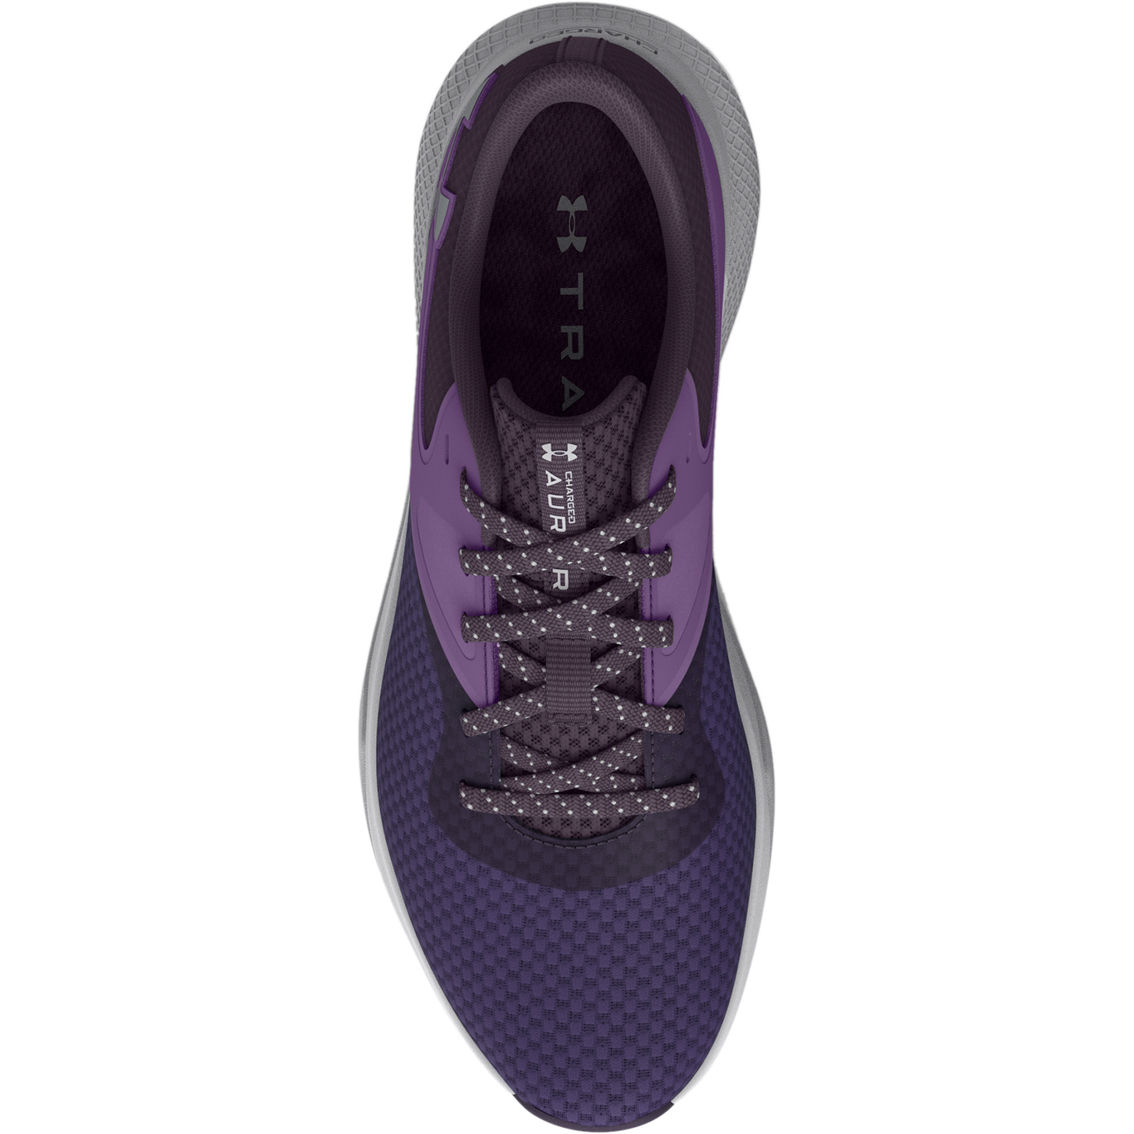 Under Armour Women's UA Charged Aurora 2 Training Shoes - Image 4 of 5